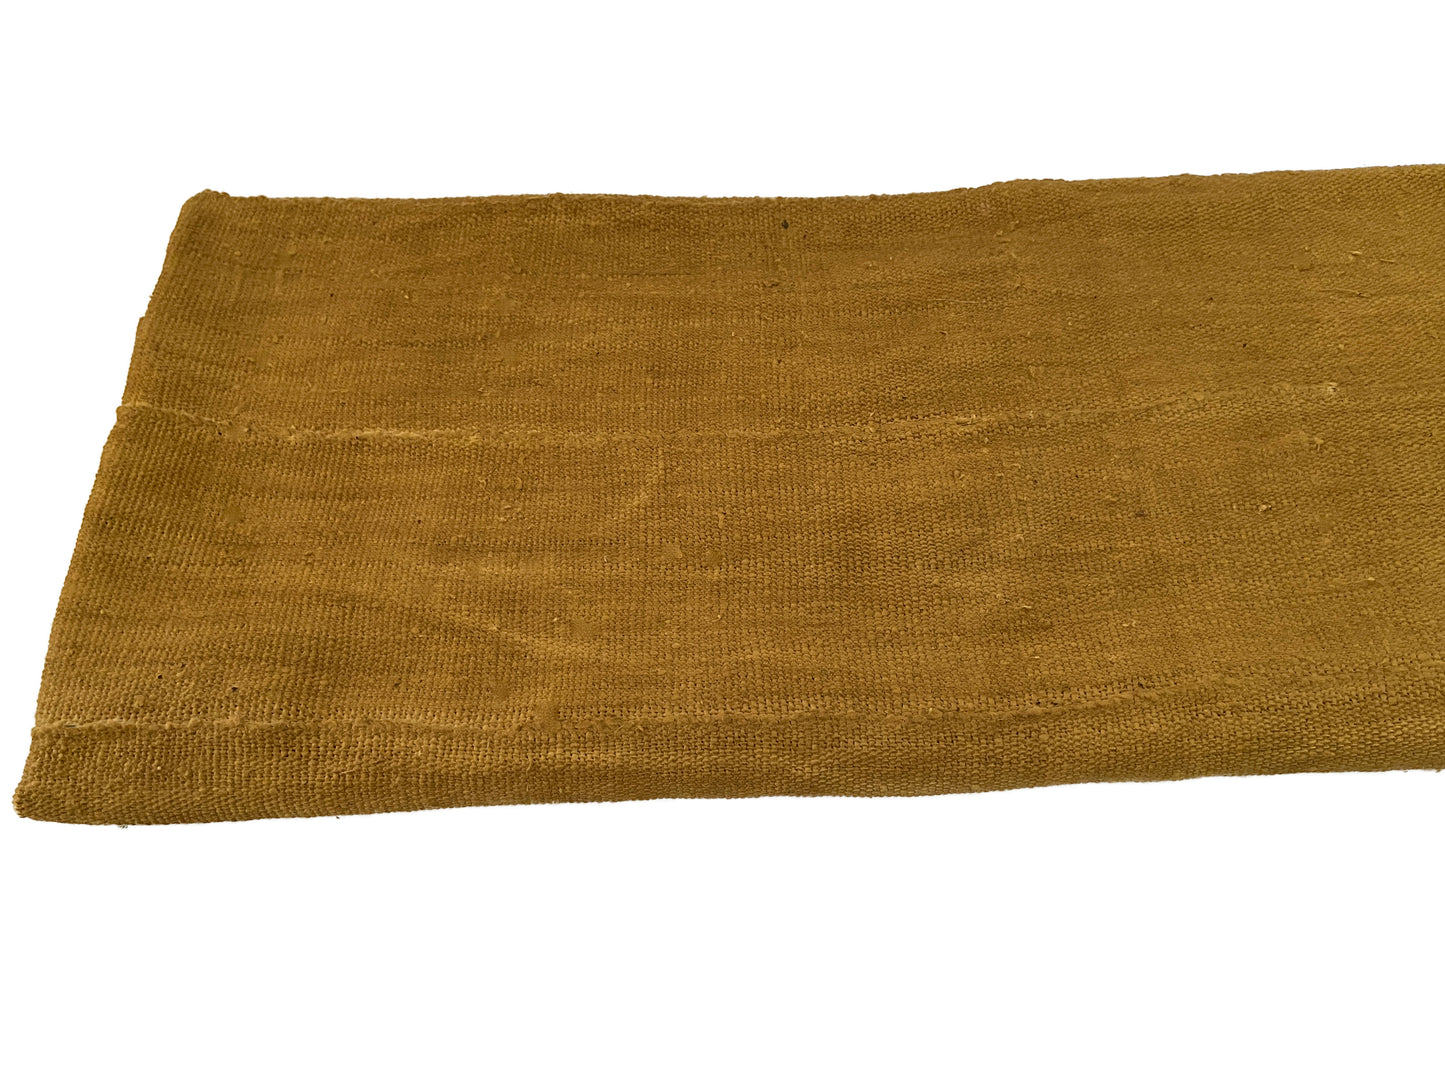 African Plain Mustard Color Mud Cloth Textile Mali 64" by 41" # 2310